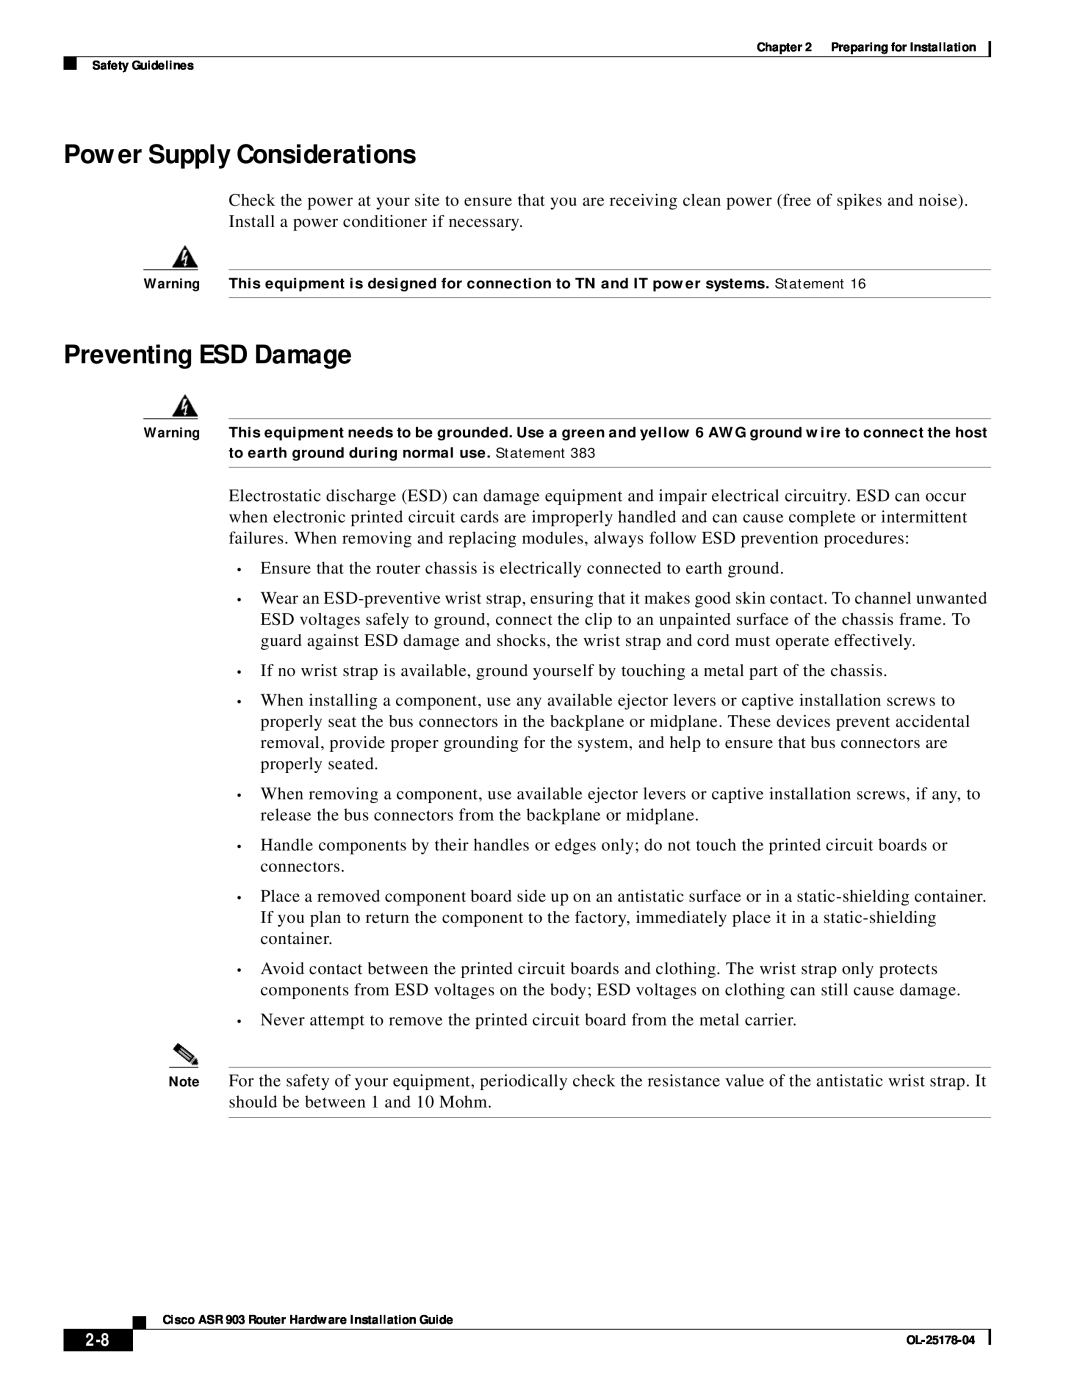 Cisco Systems ASR 903 manual Power Supply Considerations, Preventing ESD Damage 